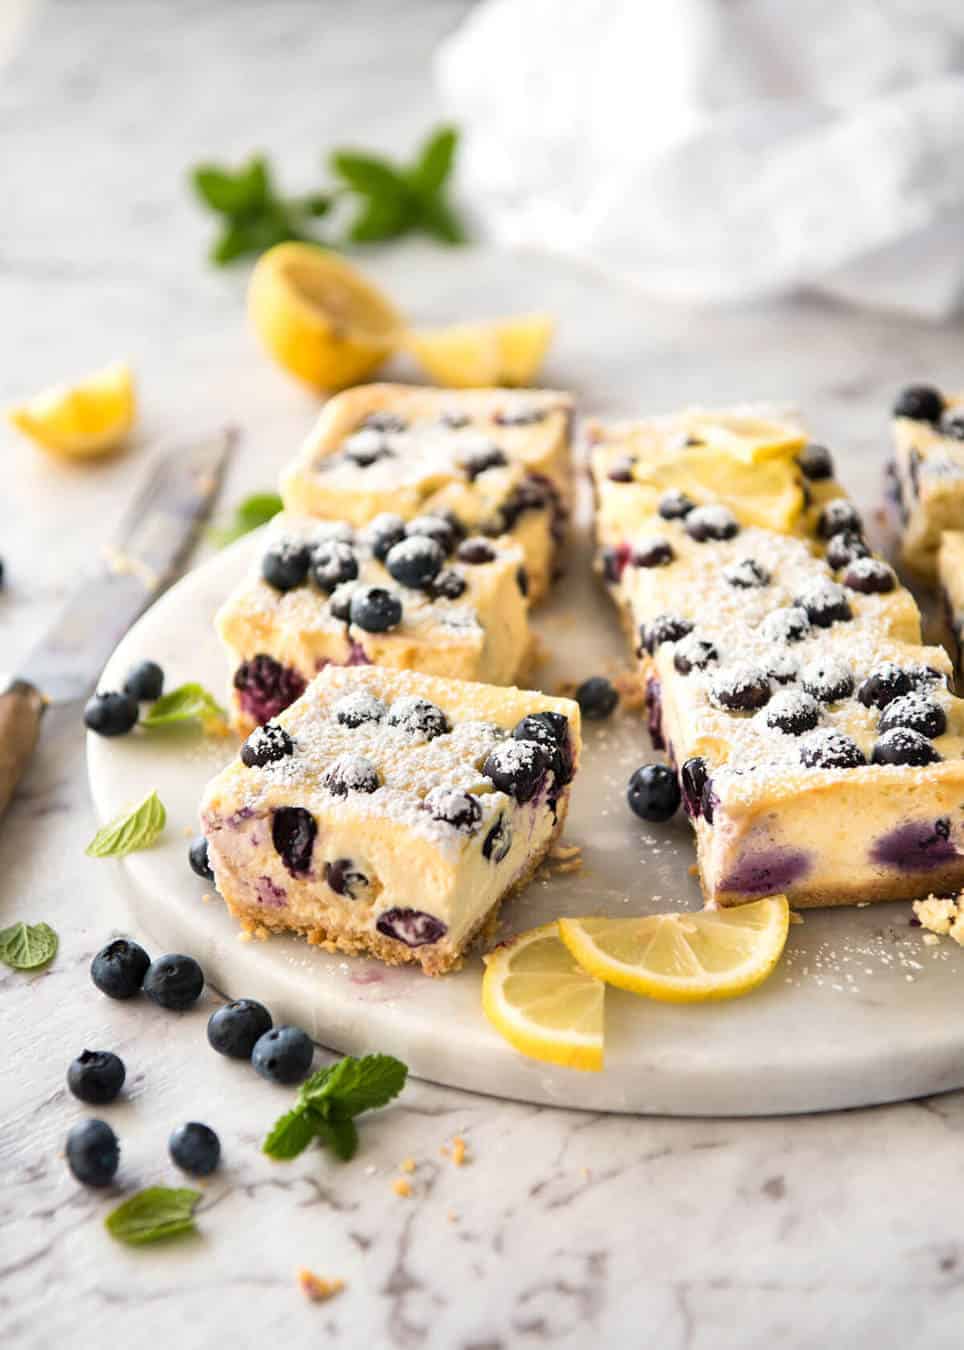 These Blueberry Cheesecake Bars are light yet creamy and luscious. Filled with soft blueberries, this is a baked cheesecake that's so easy to make! www.recipetineats.com